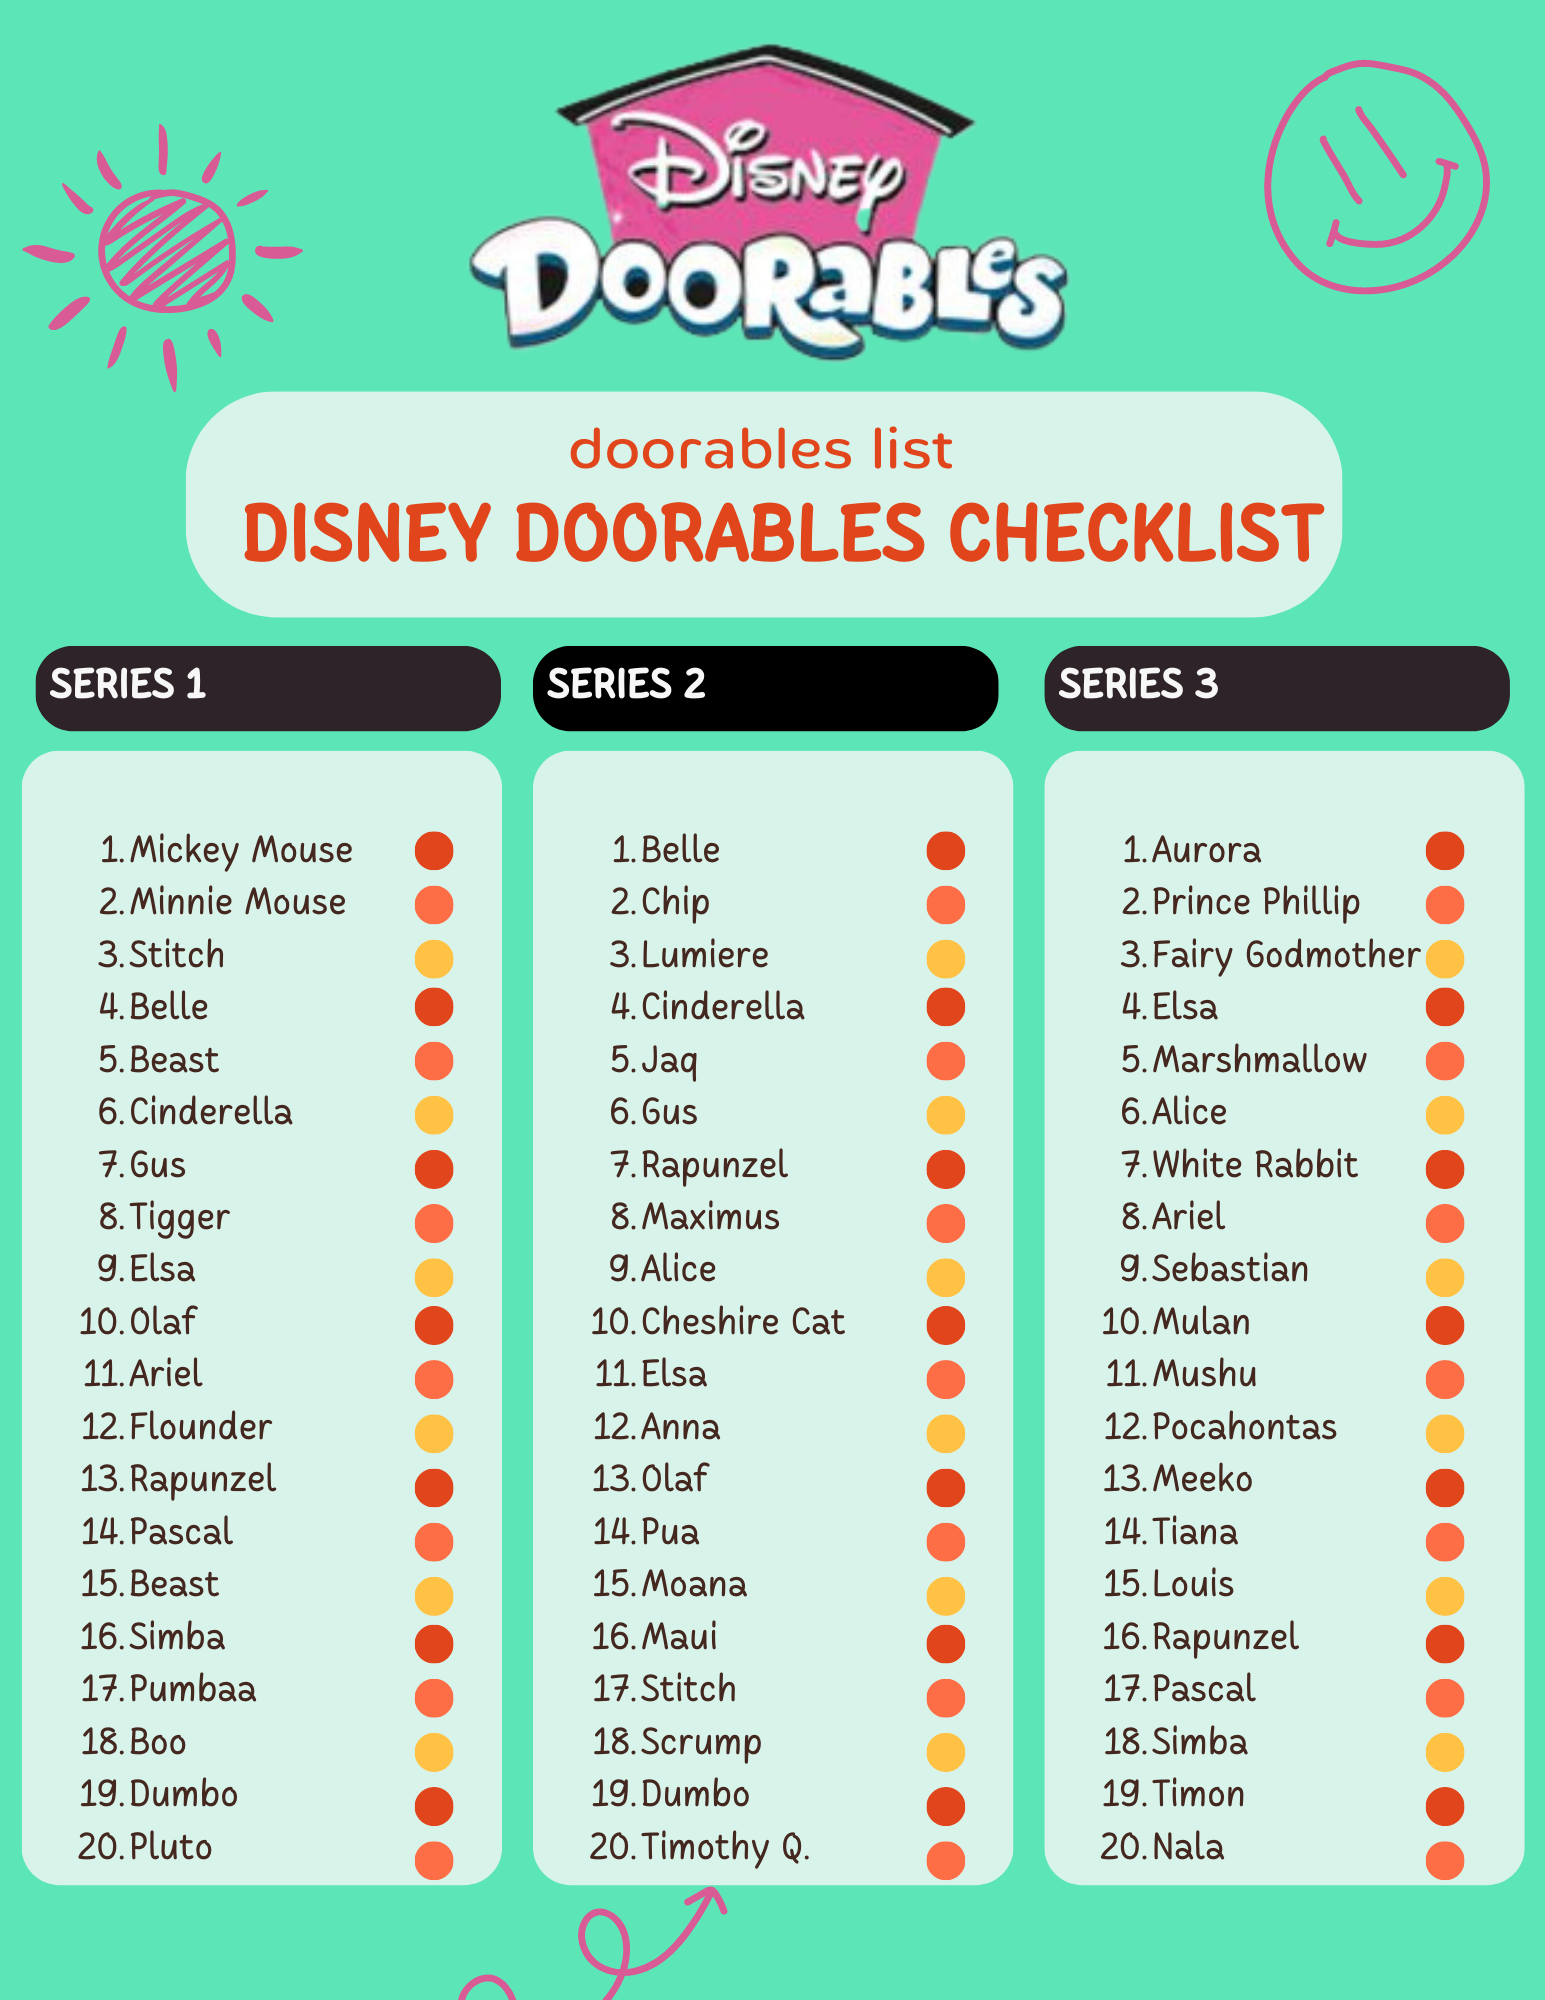 Disney Doorables List – What characters can you expect to find? 